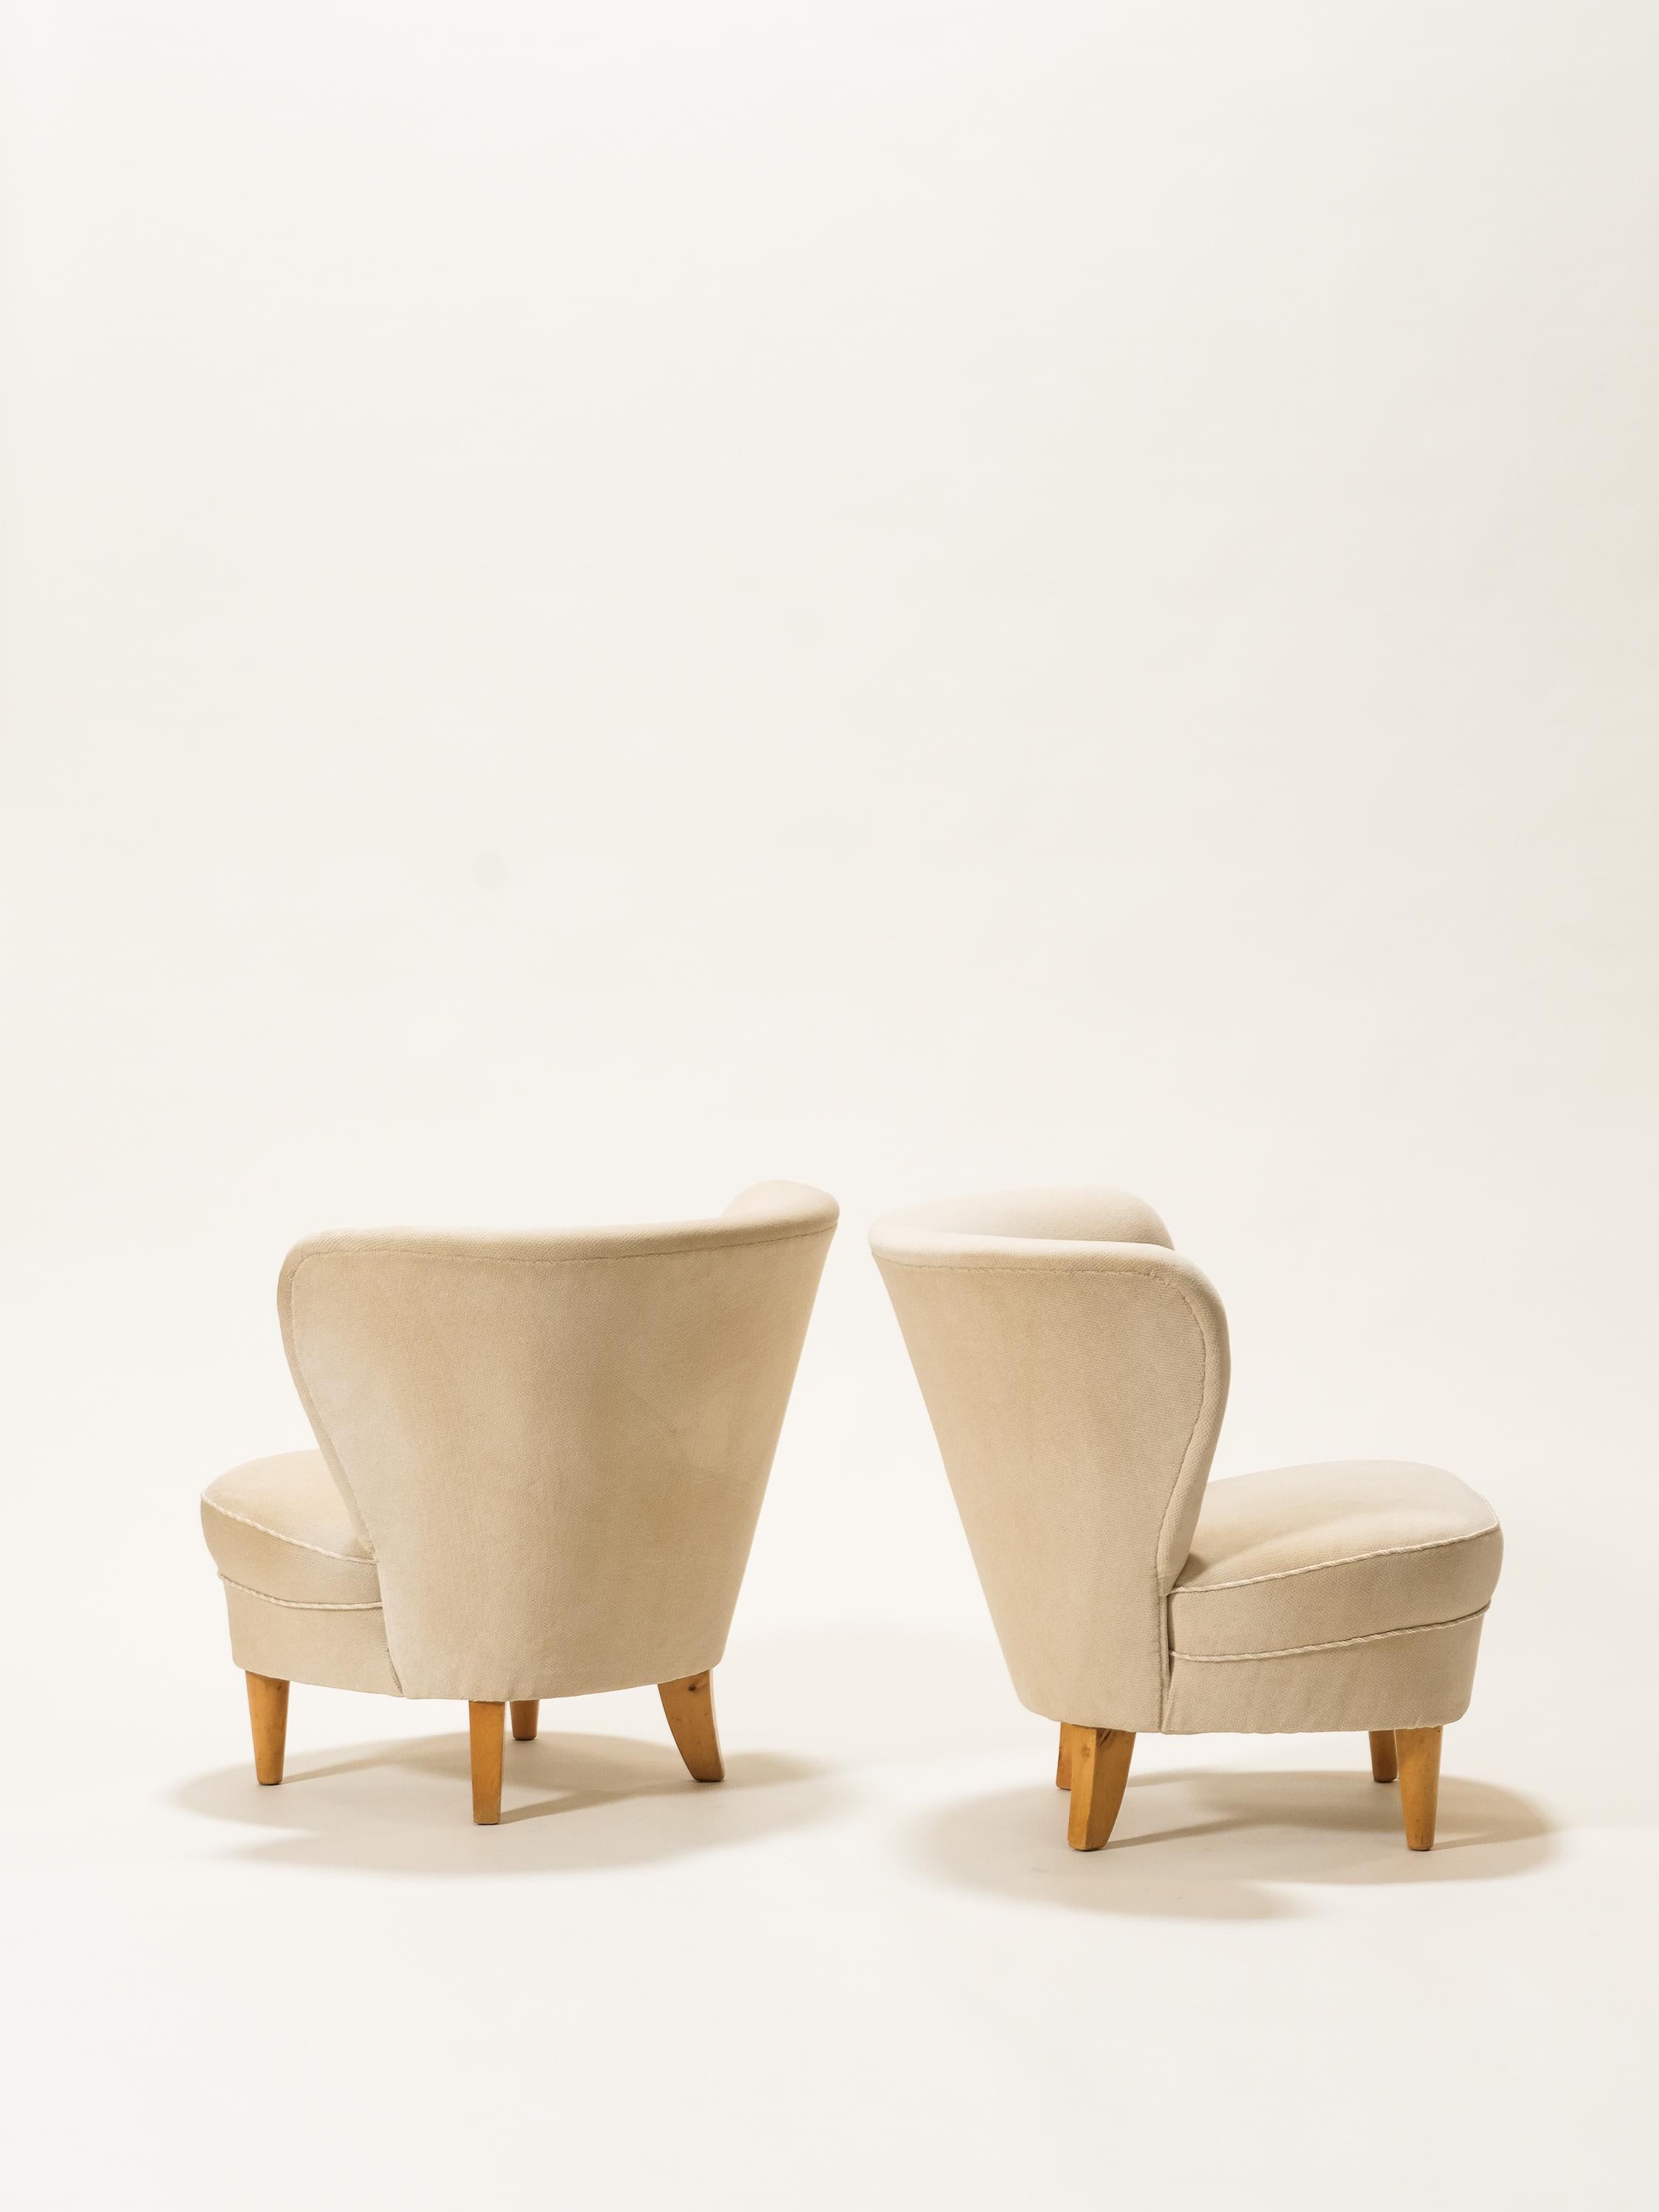 Pair of Mid-Century Easy Chairs, Finland, 1950s For Sale 4